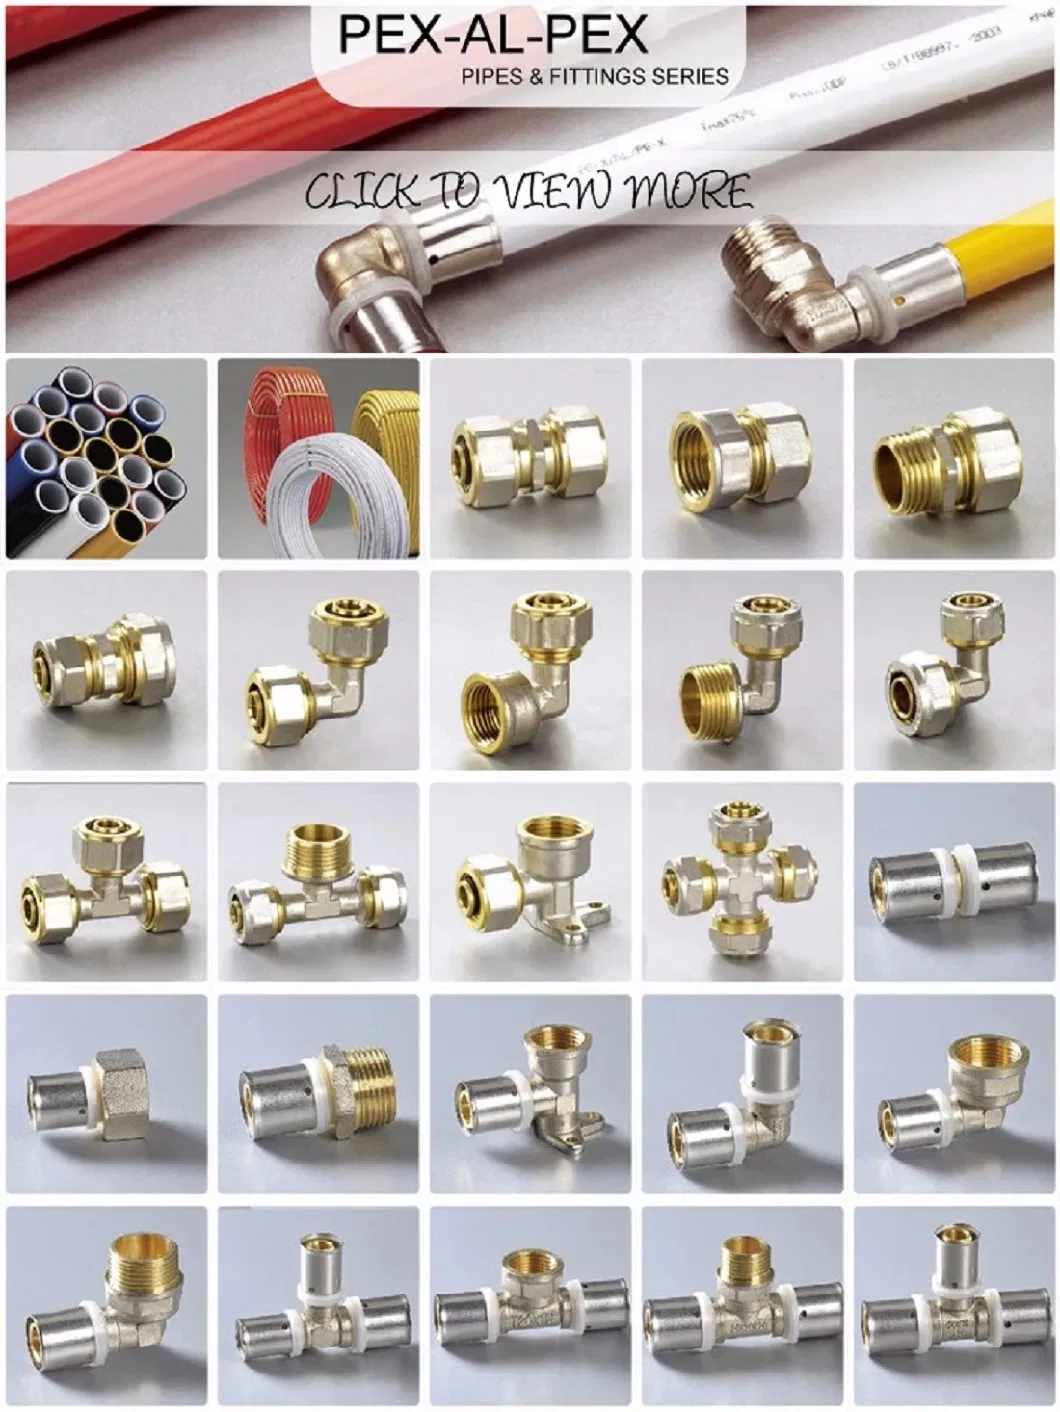 China Manufacturer Tee Female Thread Connector Compression Brass Fittings for Pex-Al-Pex Multilayer/Composite Pipes